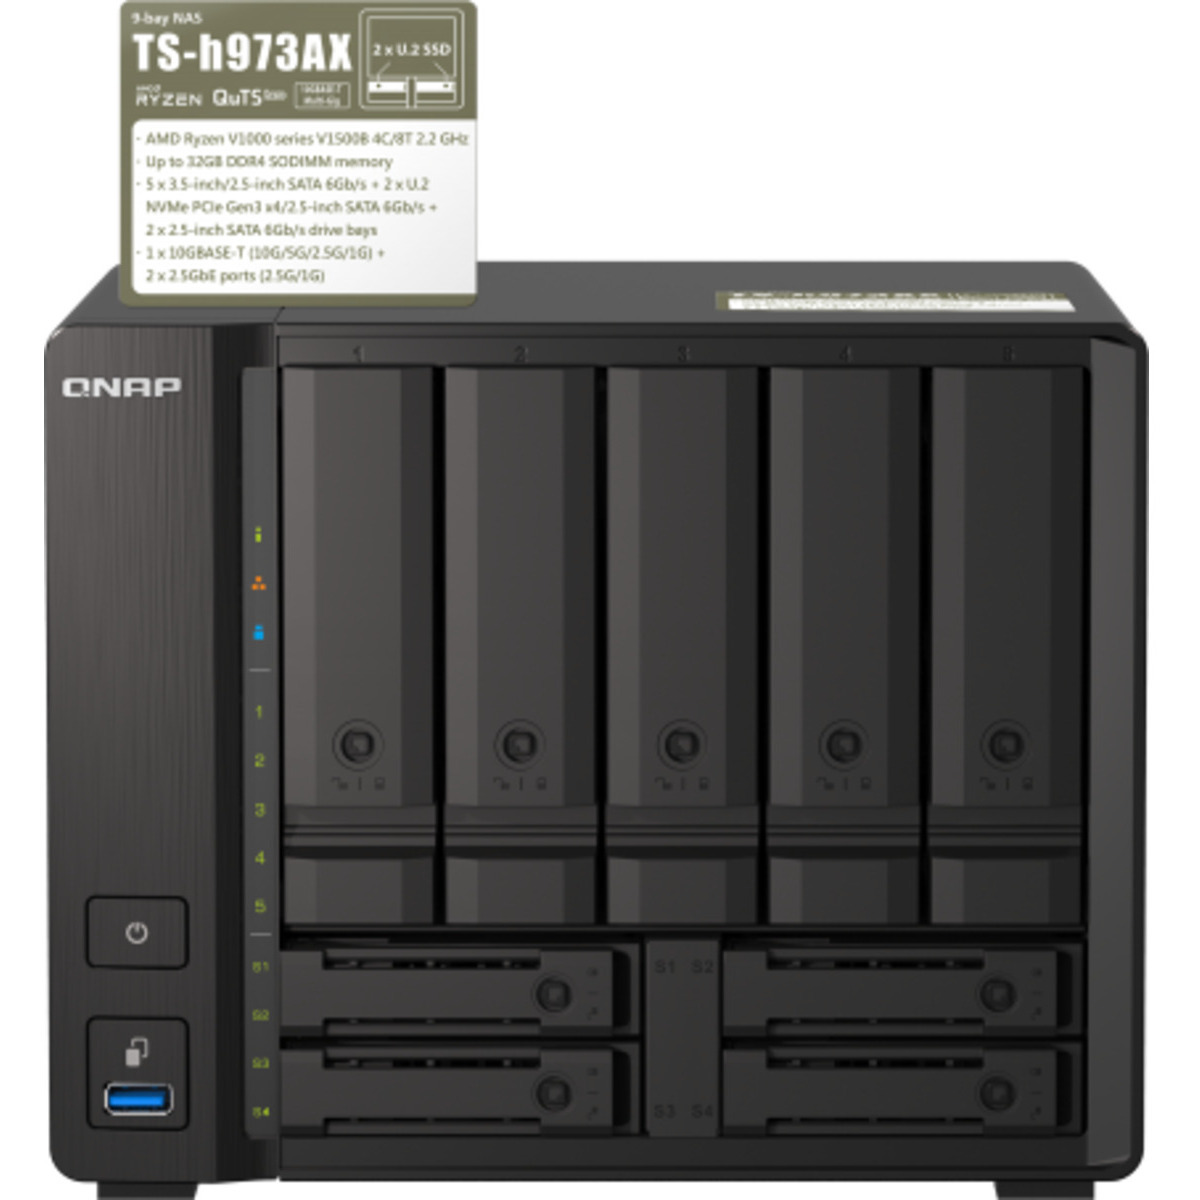 QNAP TS-h973AX  18tb 5+4-Bay Desktop Multimedia / Power User / Business NAS - Network Attached Storage Device 3x6tb Western Digital Red Pro WD6003FFBX 3.5 7200rpm SATA 6Gb/s HDD NAS Class Drives Installed - Burn-In Tested TS-h973AX 